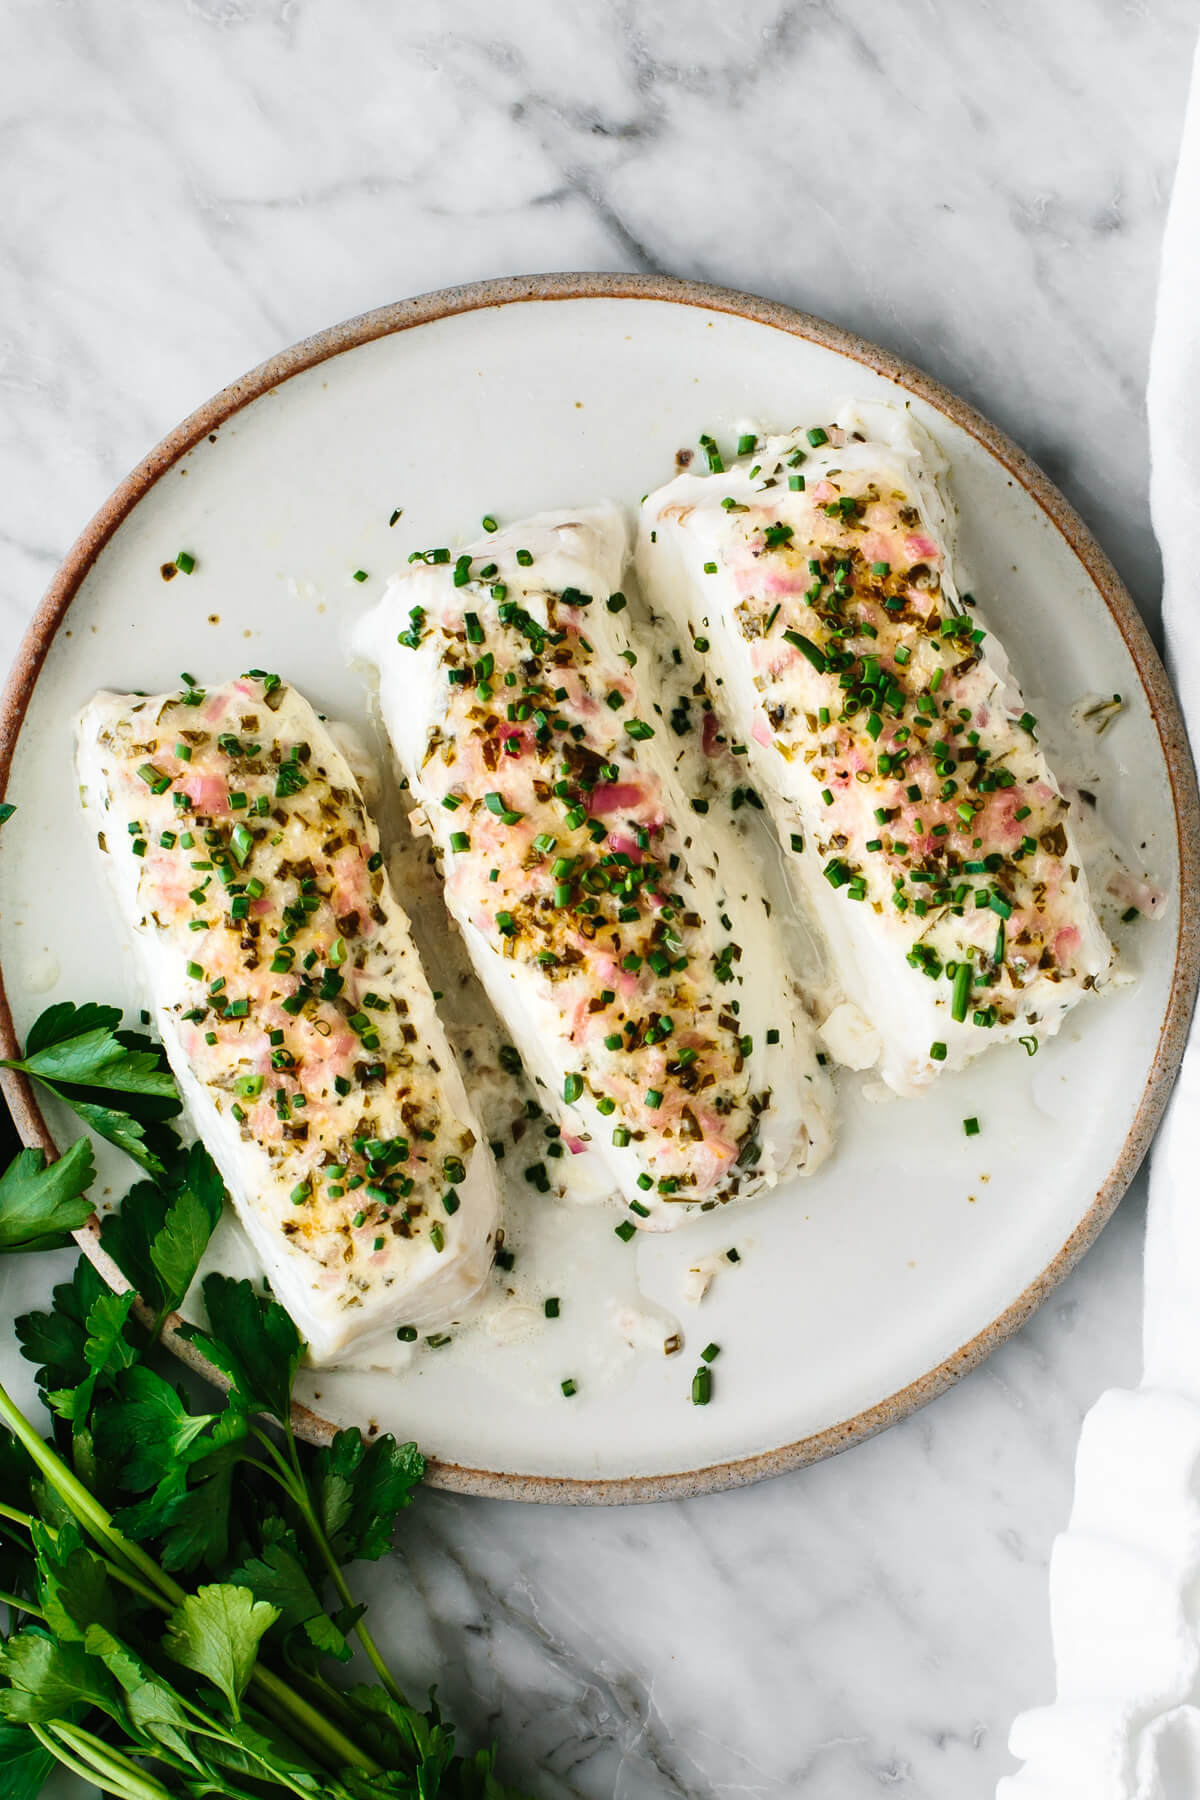 Baked halibut fillets on a plate next to cilantro